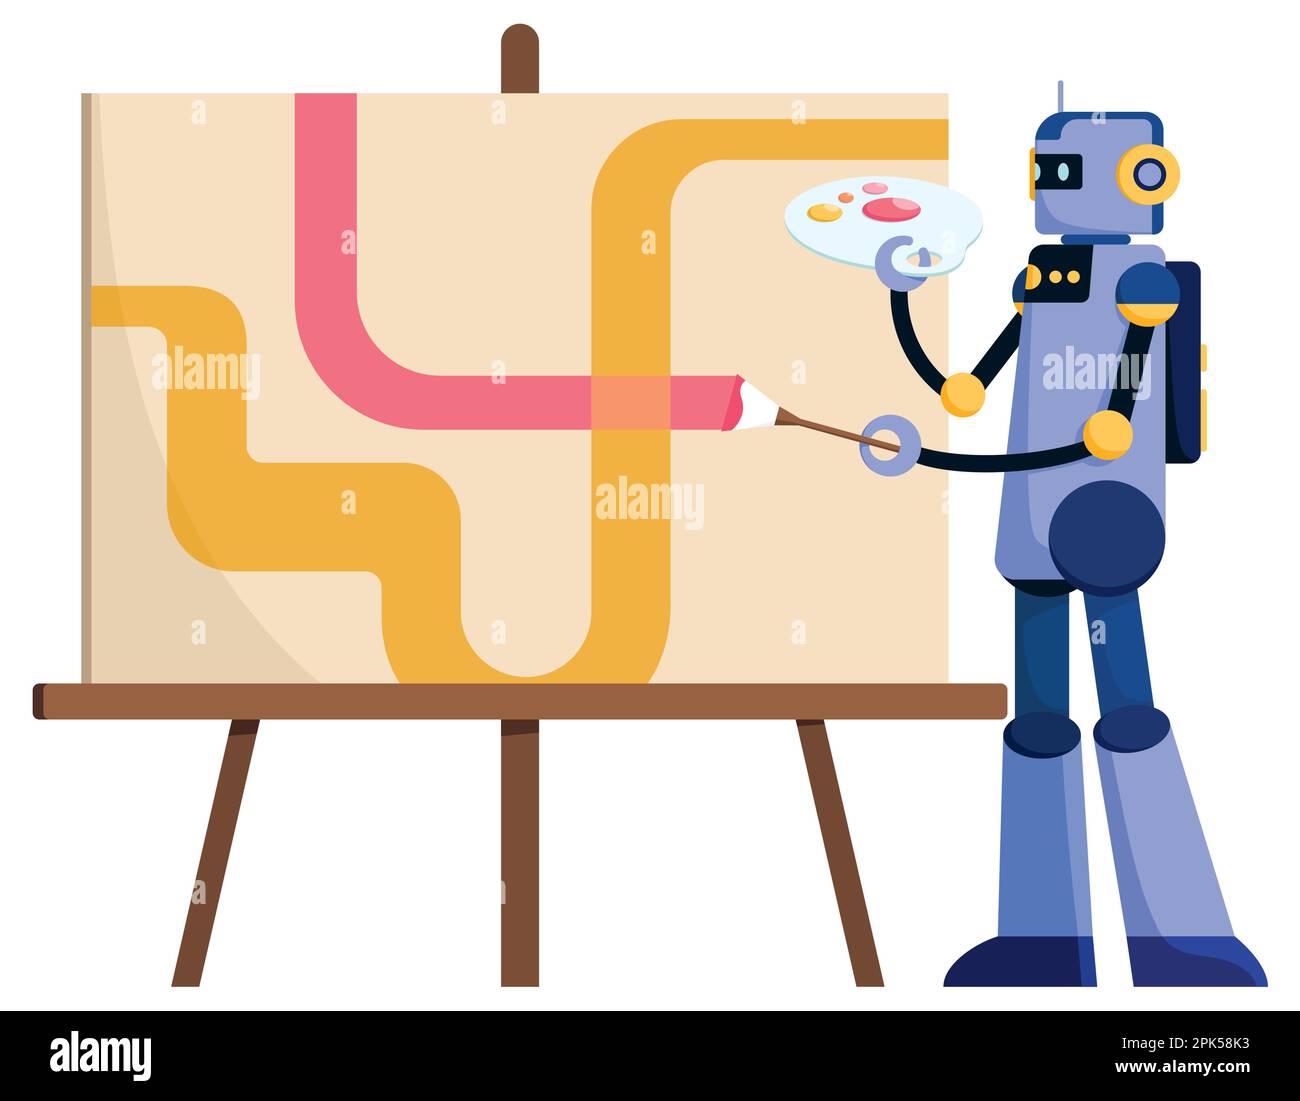 Artificial Intelligence Drawing on White Stock Vector